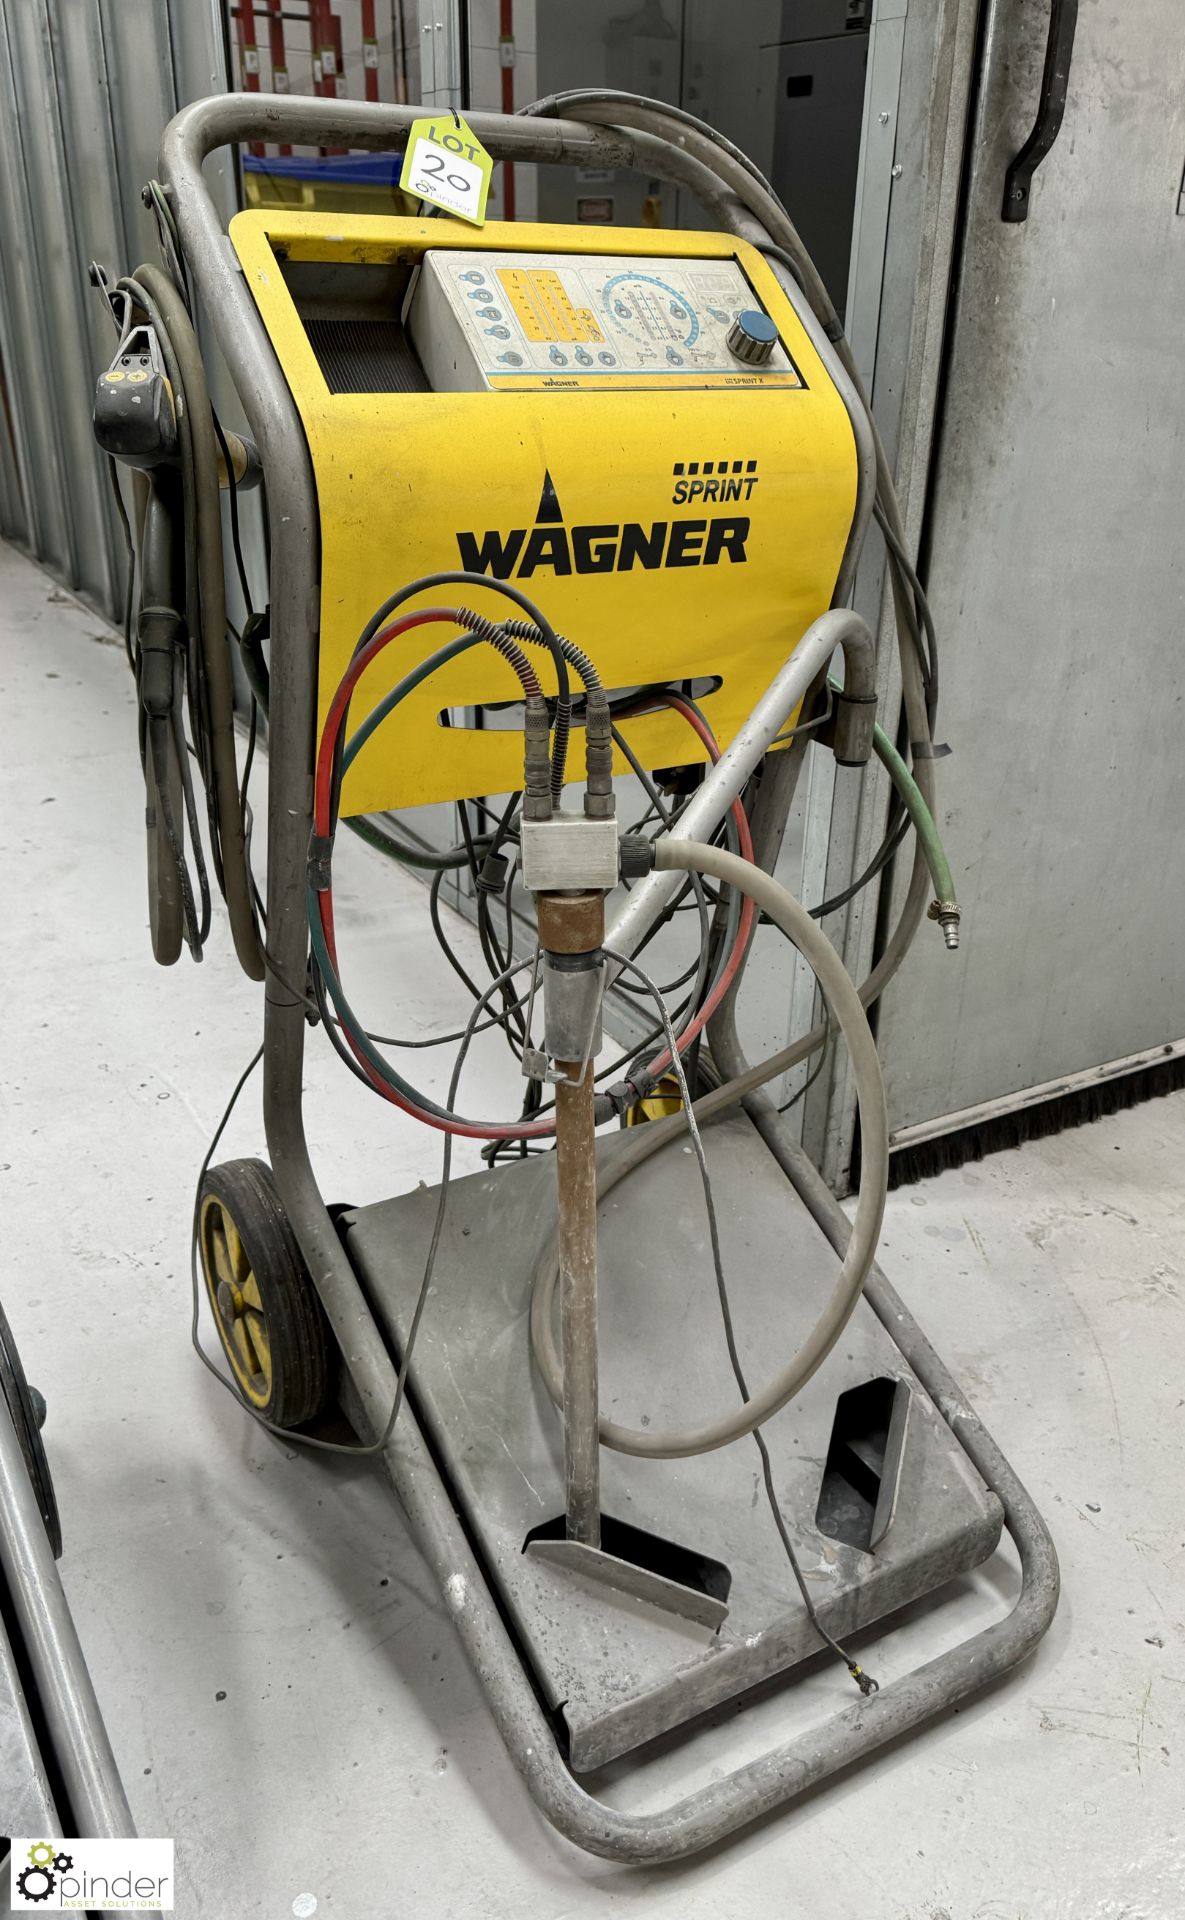 Wagner Sprint X Powder Coating Spray System, serial number 6838